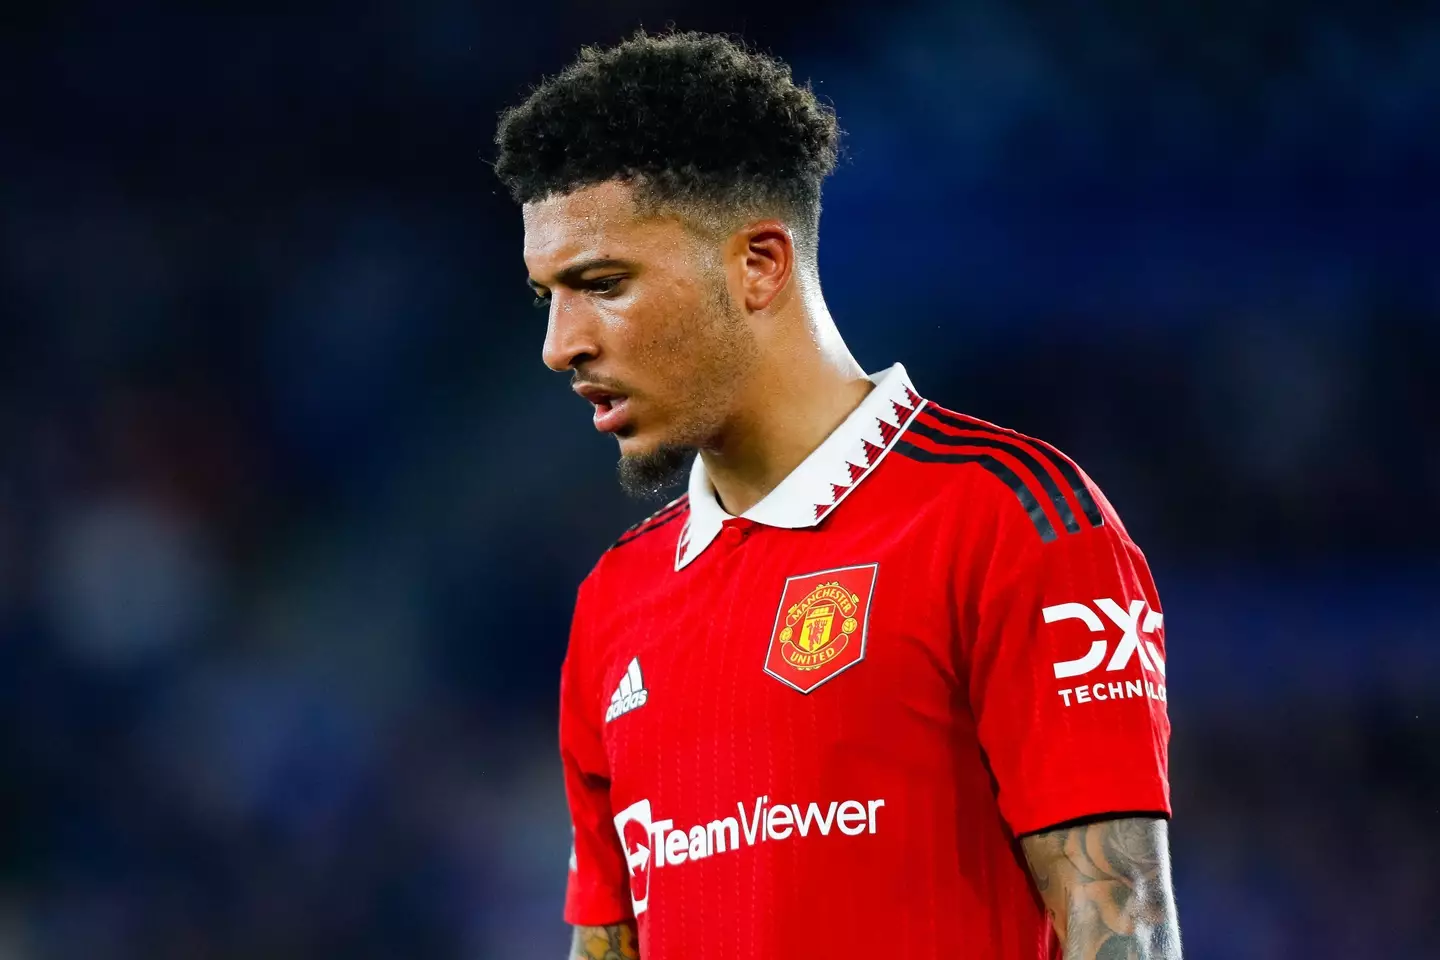 The Brazilian revealed he is friends with Manchester United star Jadon Sancho (Image: Alamy)